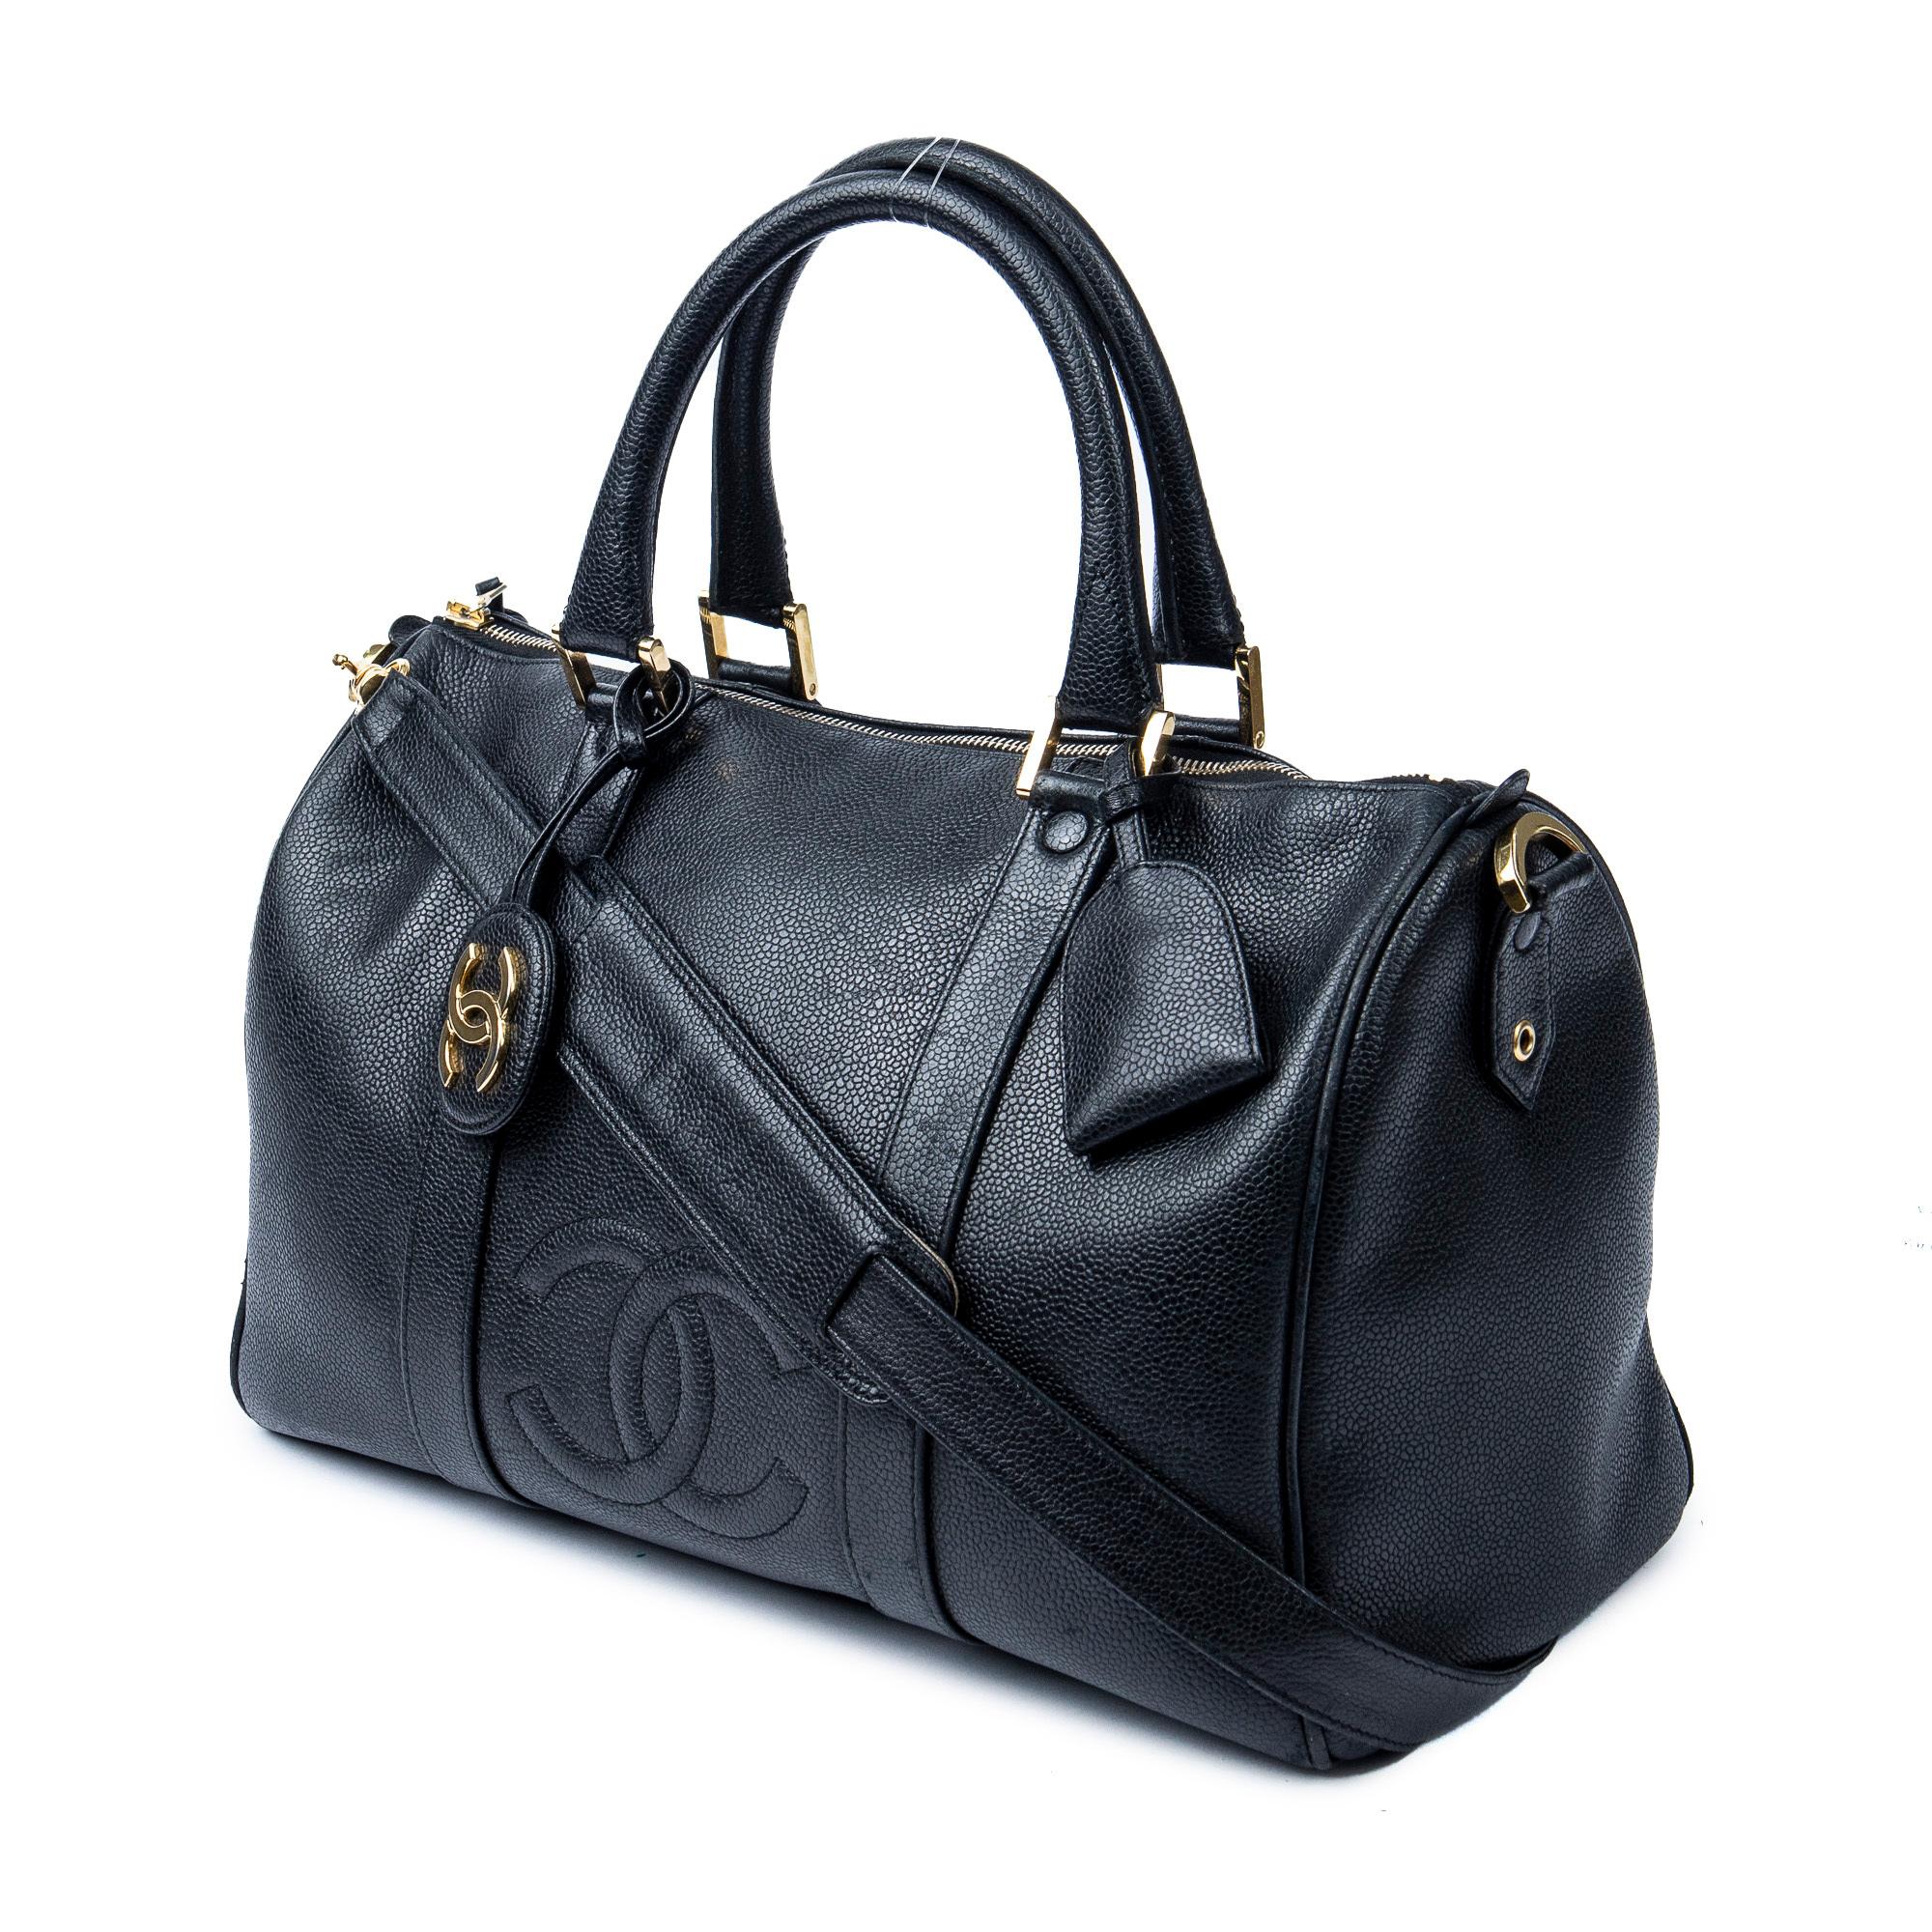 Step into the glamorous world of Chanel with this iconic vintage Chanel small weekender which could also be used as a daily carry. Crafted from luxurious black calfskin leather, this statement piece exudes elegance. The sleek black leather straps